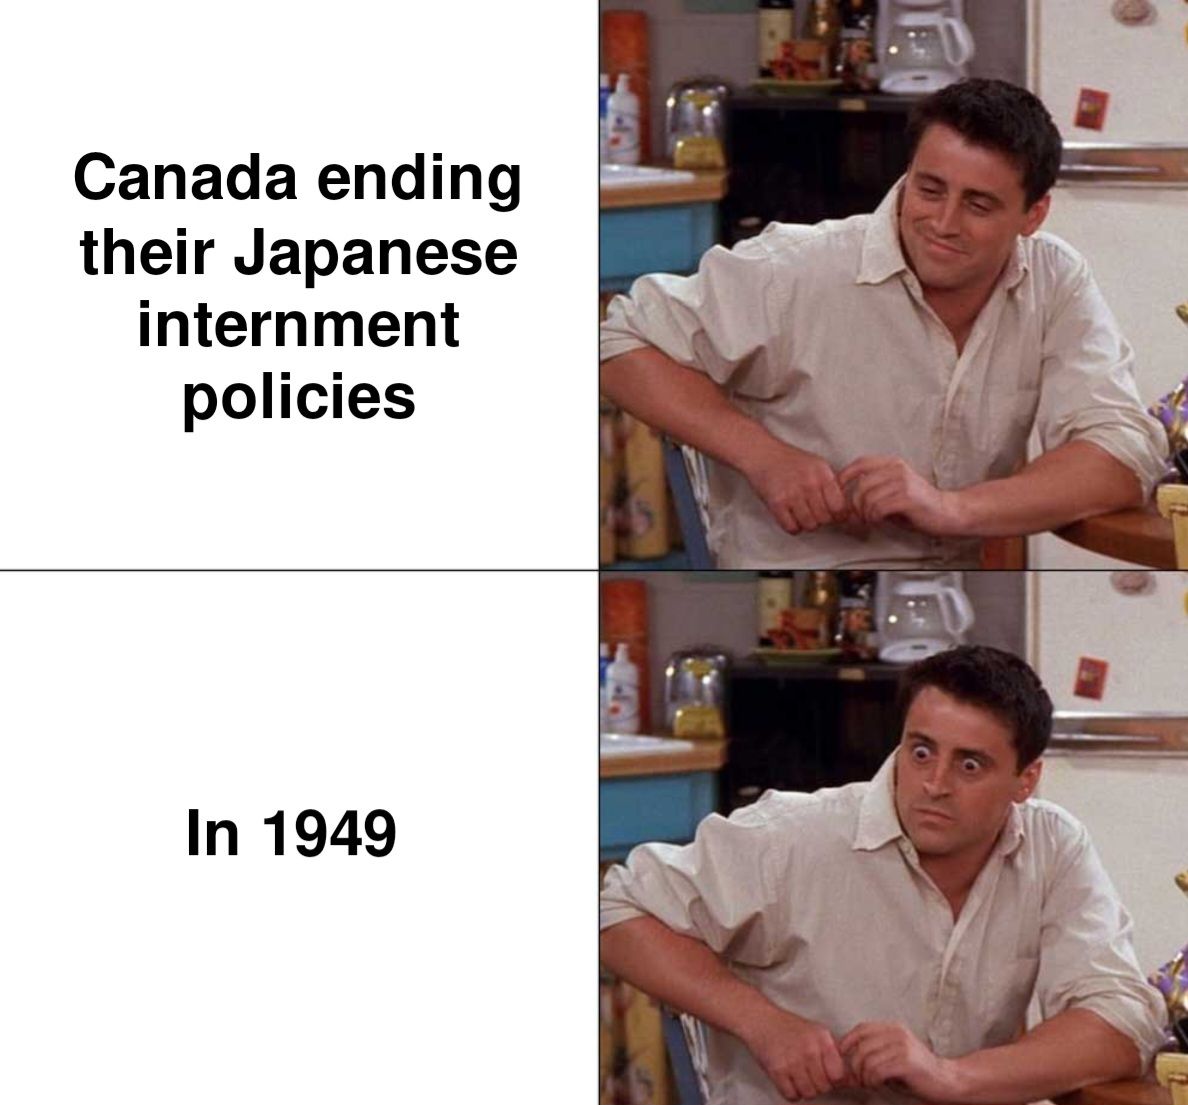 It was terrible in America too, but WTF Canada!?